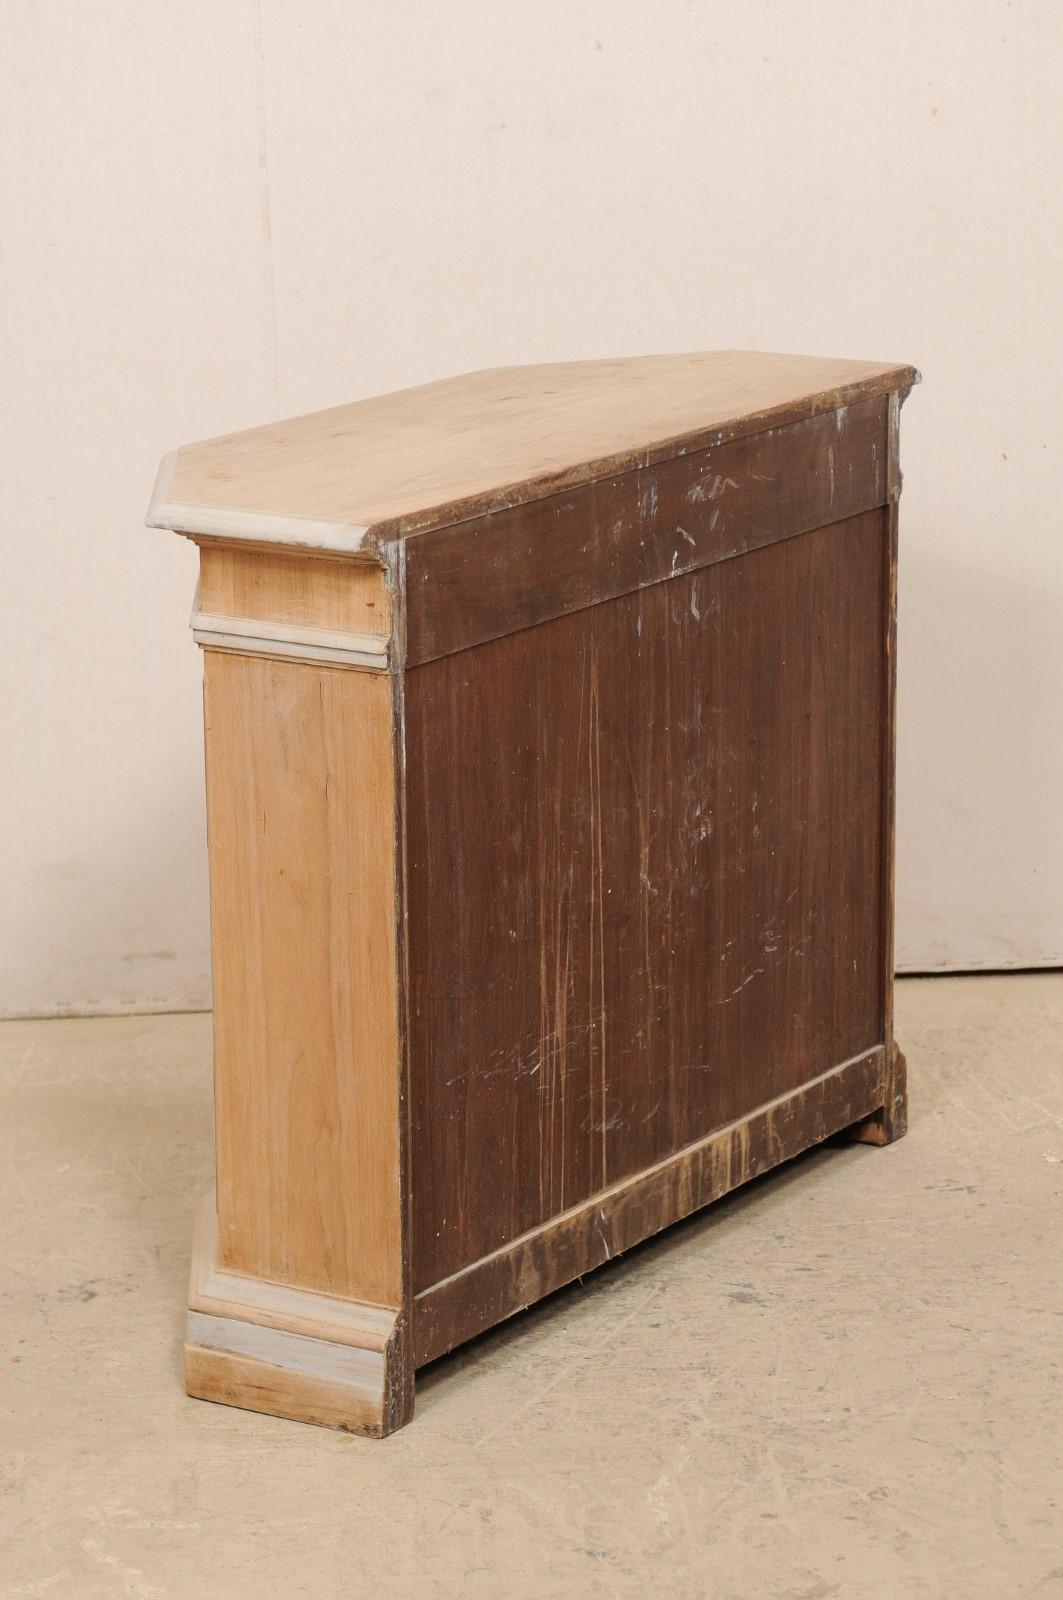 Italian Bleached Wood Console Cabinet with Blue/Gray Trim, Cute Petite Size 6